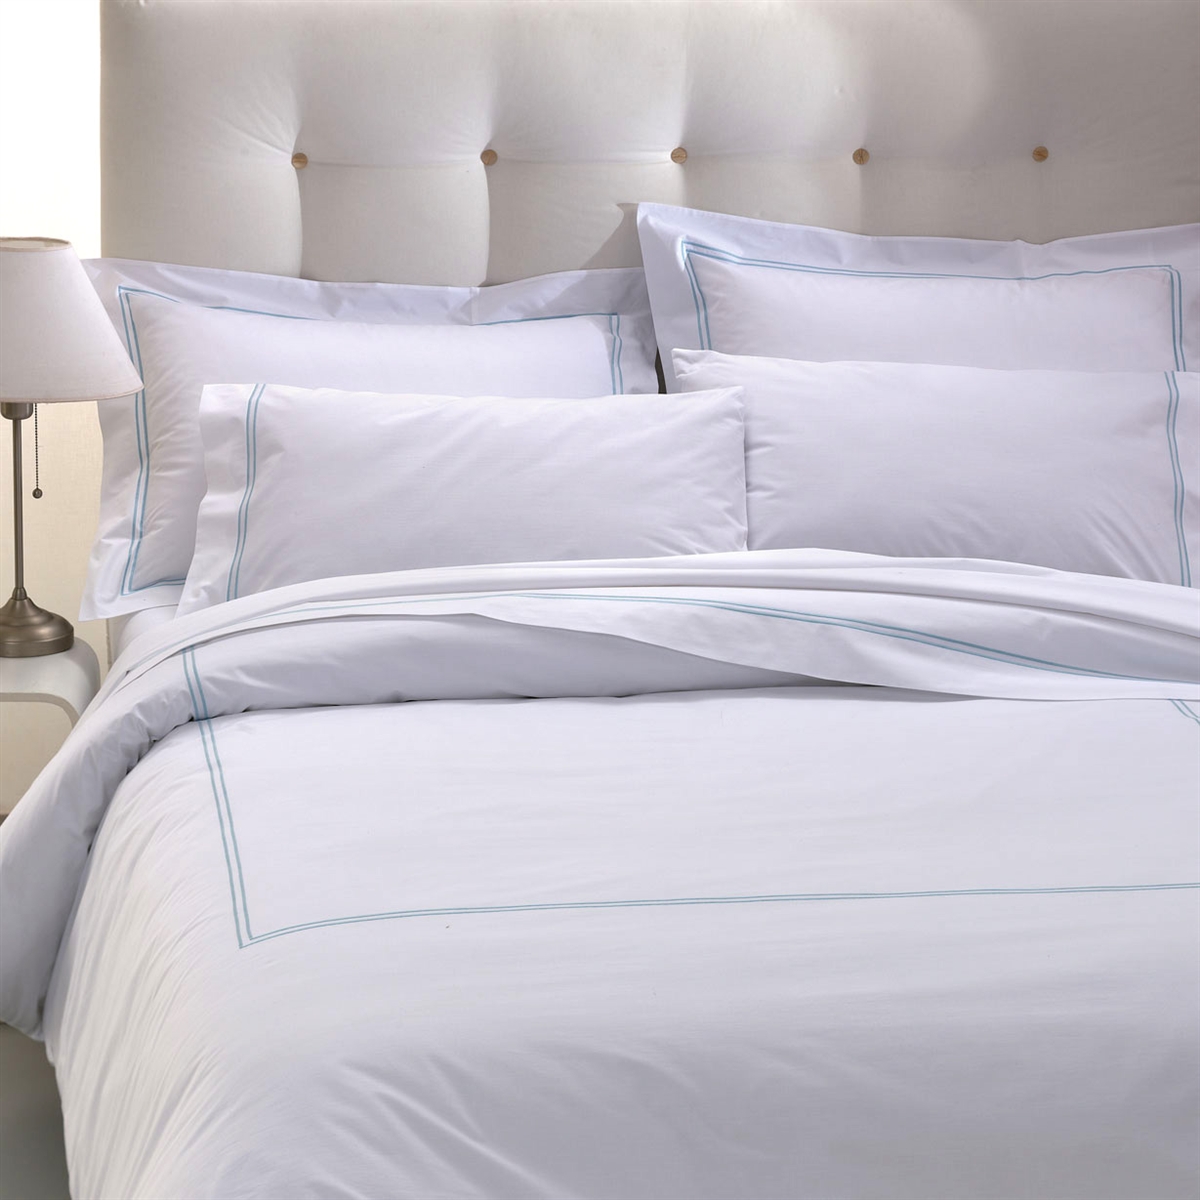 3pc Bellino Hotel Collection Italy King Duvet Cover Pillowcases Set White for sale online 